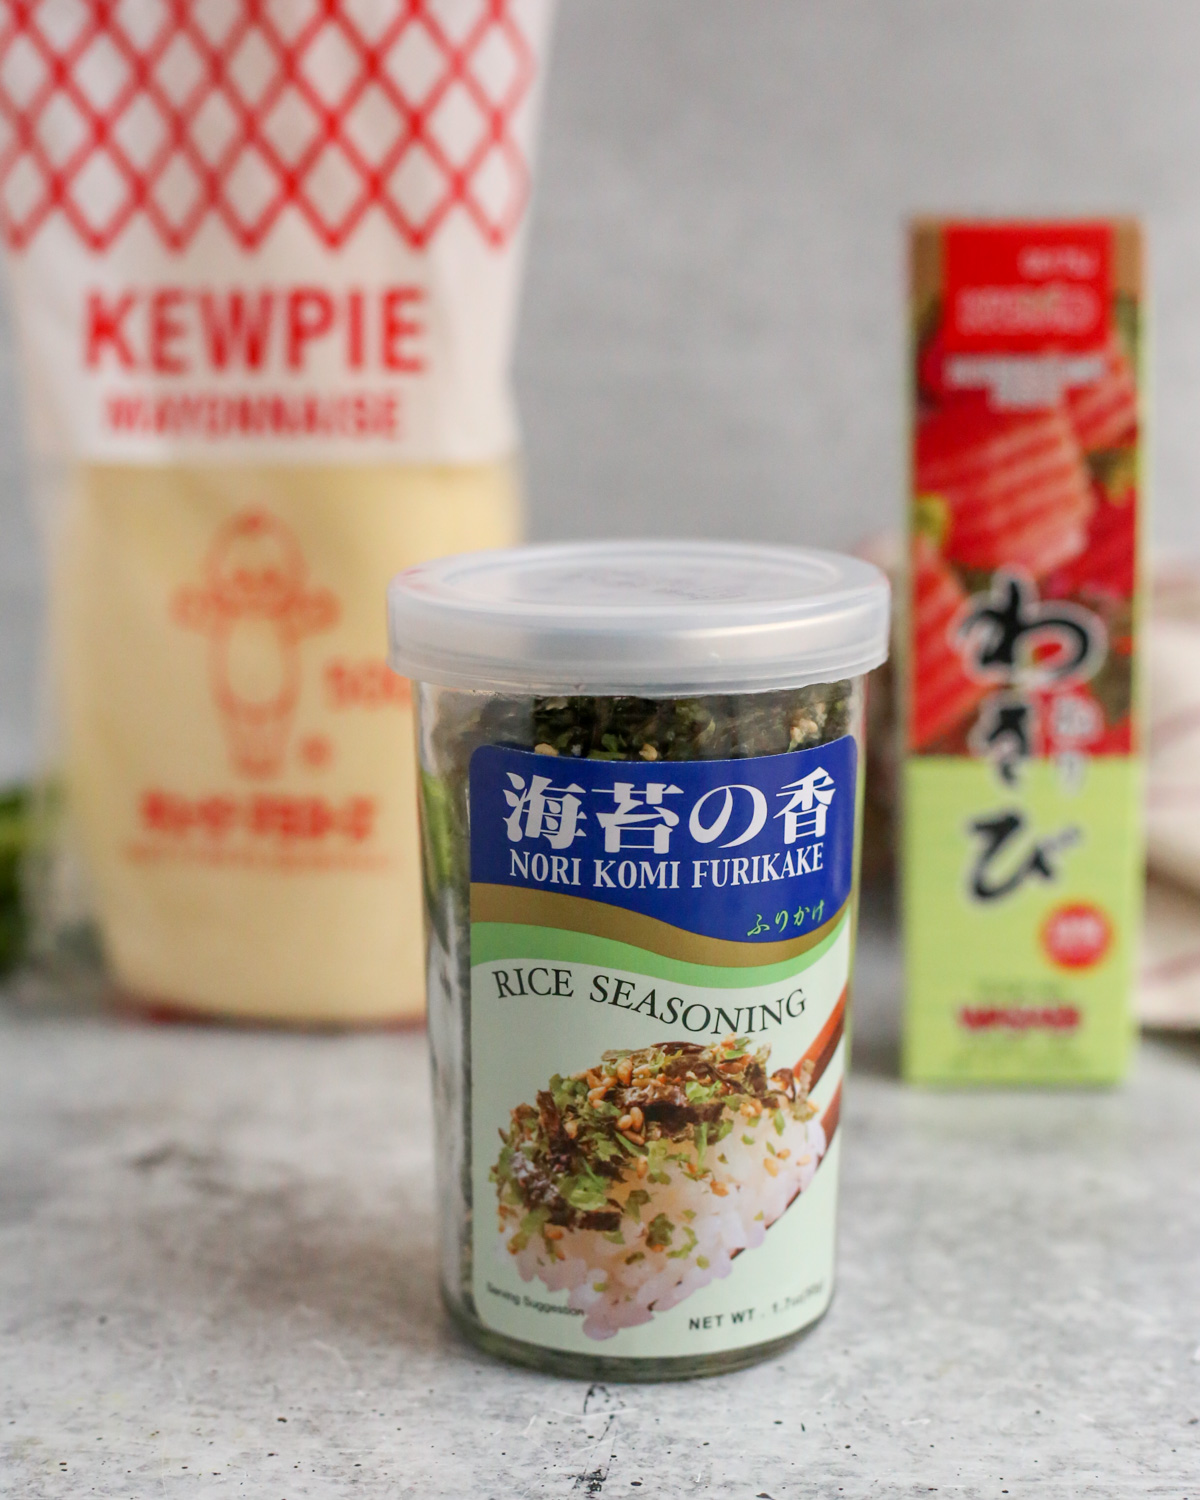 A close up view of a bottle of nori kumi Furikake, with the label for "rice seasoning", displayed on a kitchen countertop with an unopened bottle of kewpie mayo and unopened tube of wasabi paste visible in the background